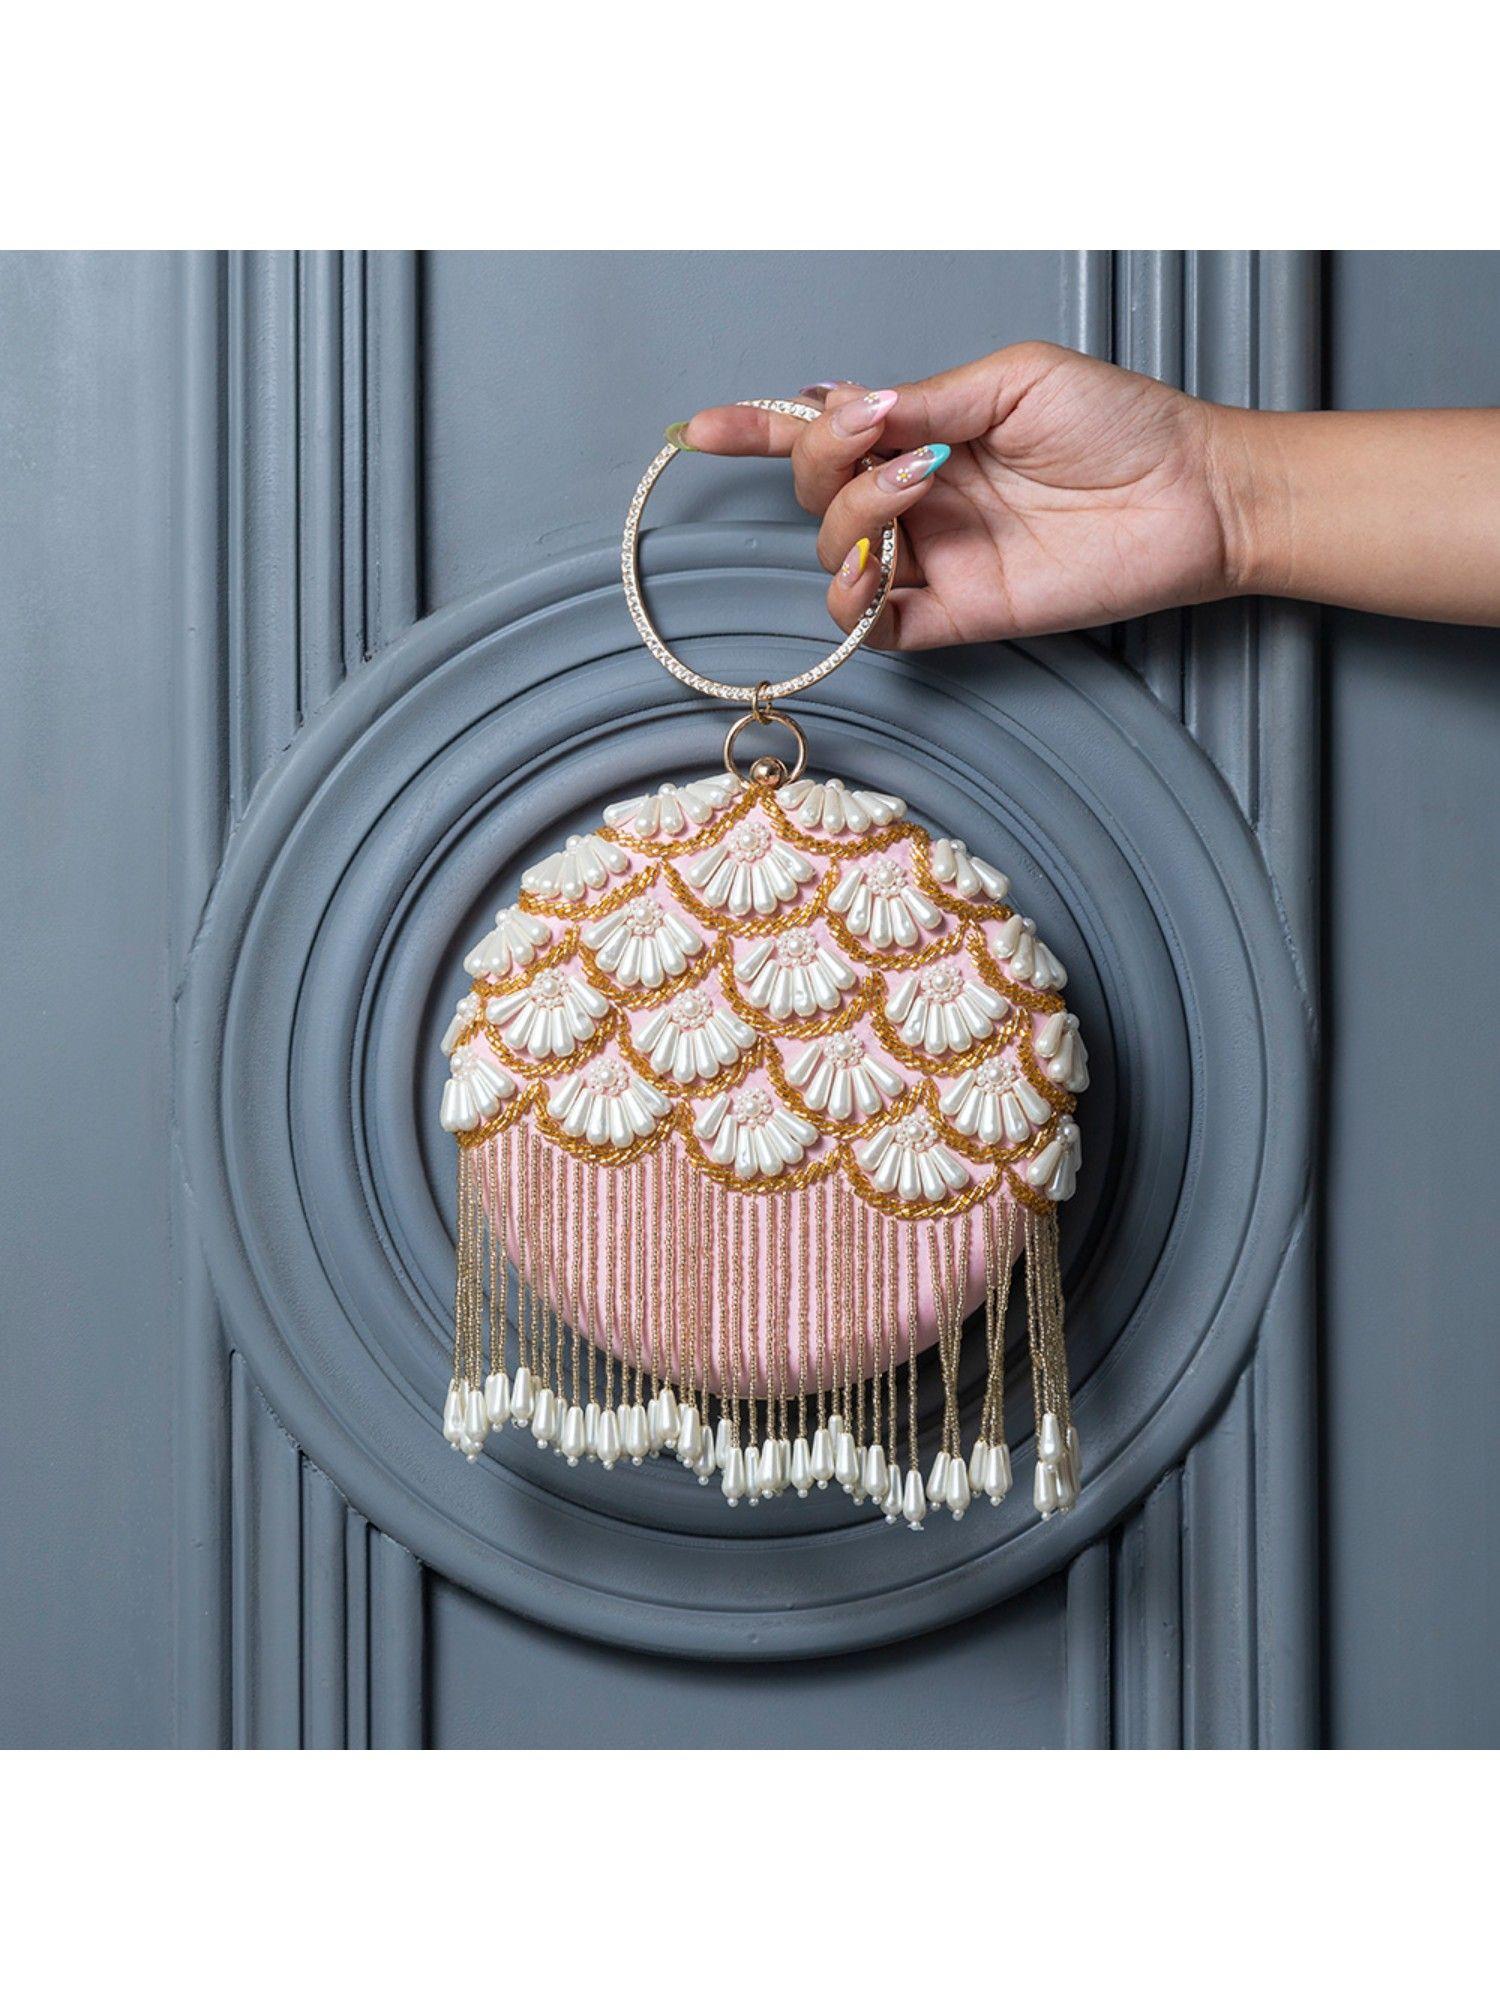 irsa hand embroidered clutch with tassles